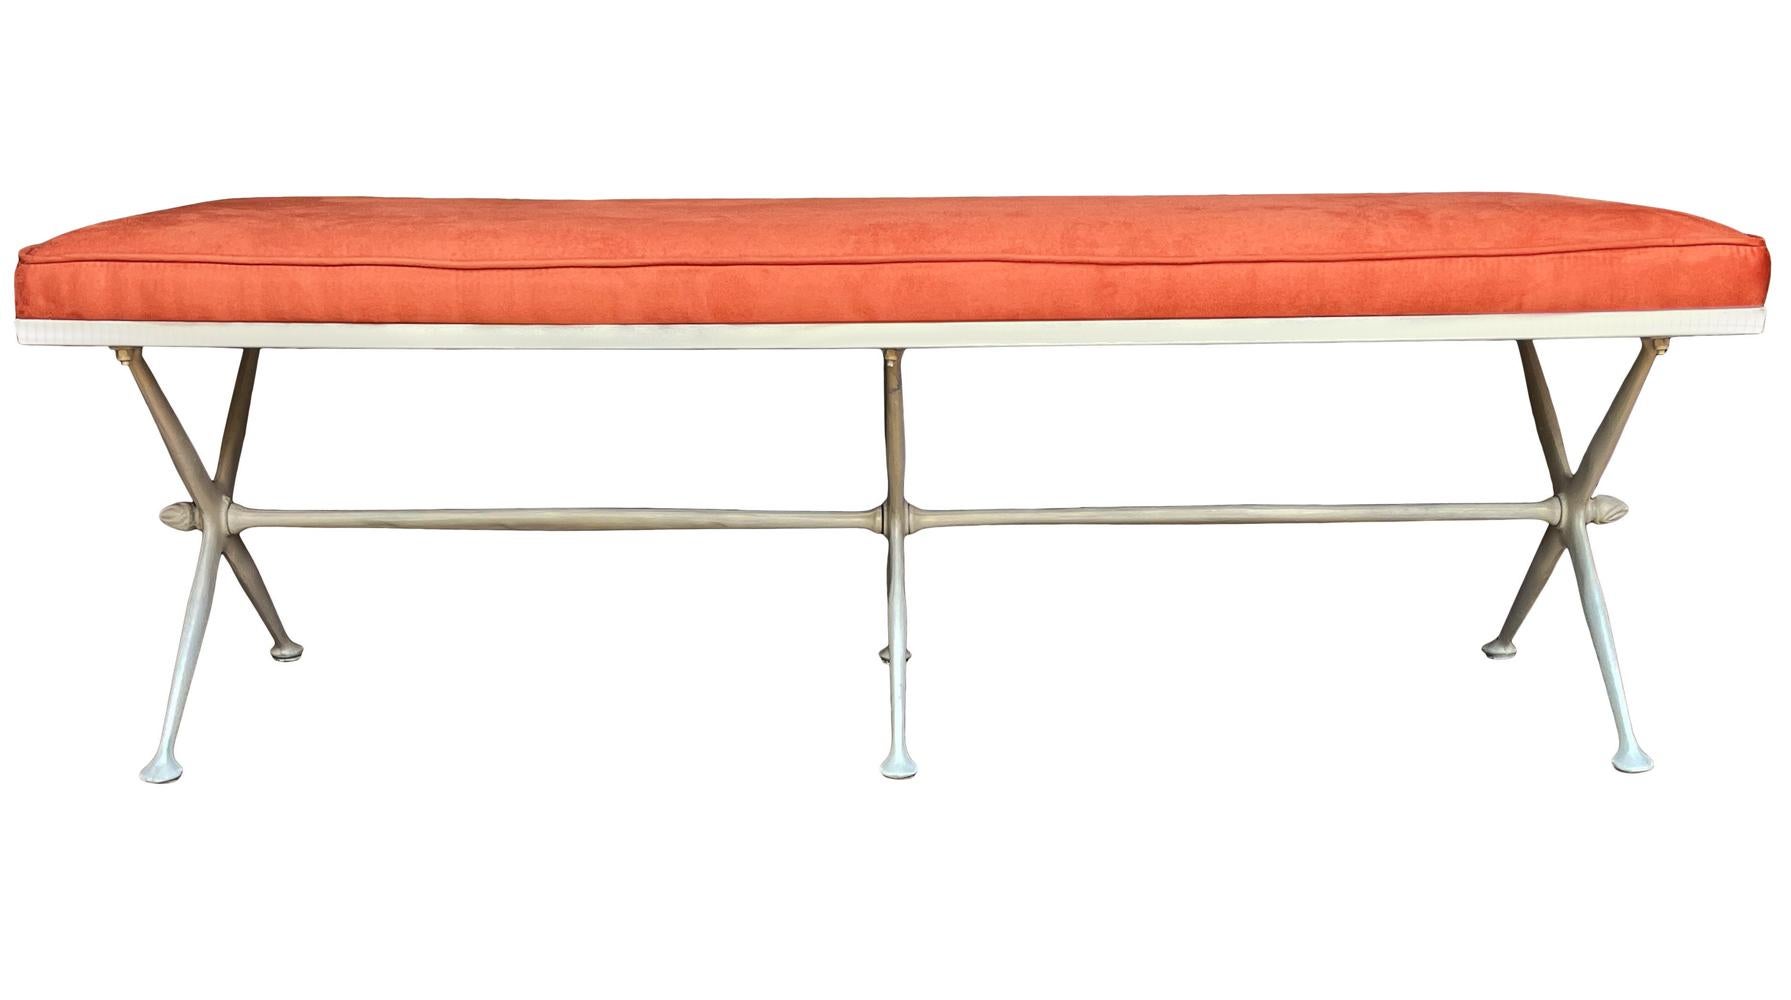 Mid-20th Century Mid-Century Modern Triple Bench with X Base in Off White & Orange